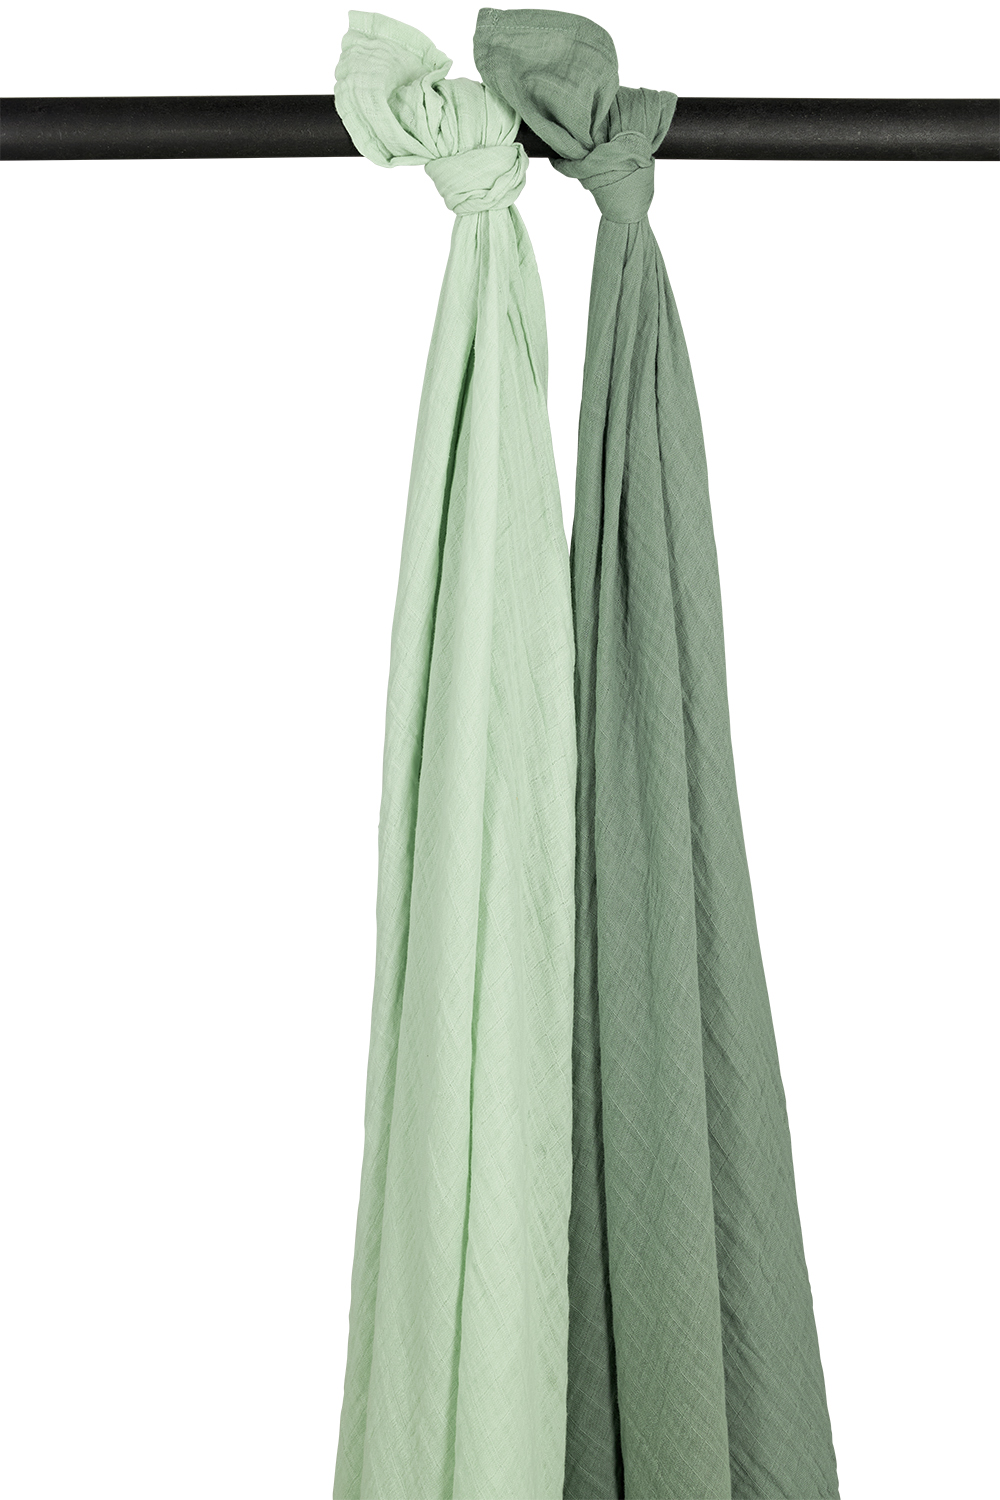 Swaddle  2er pack musselin Uni - soft green/forest green - 120x120cm